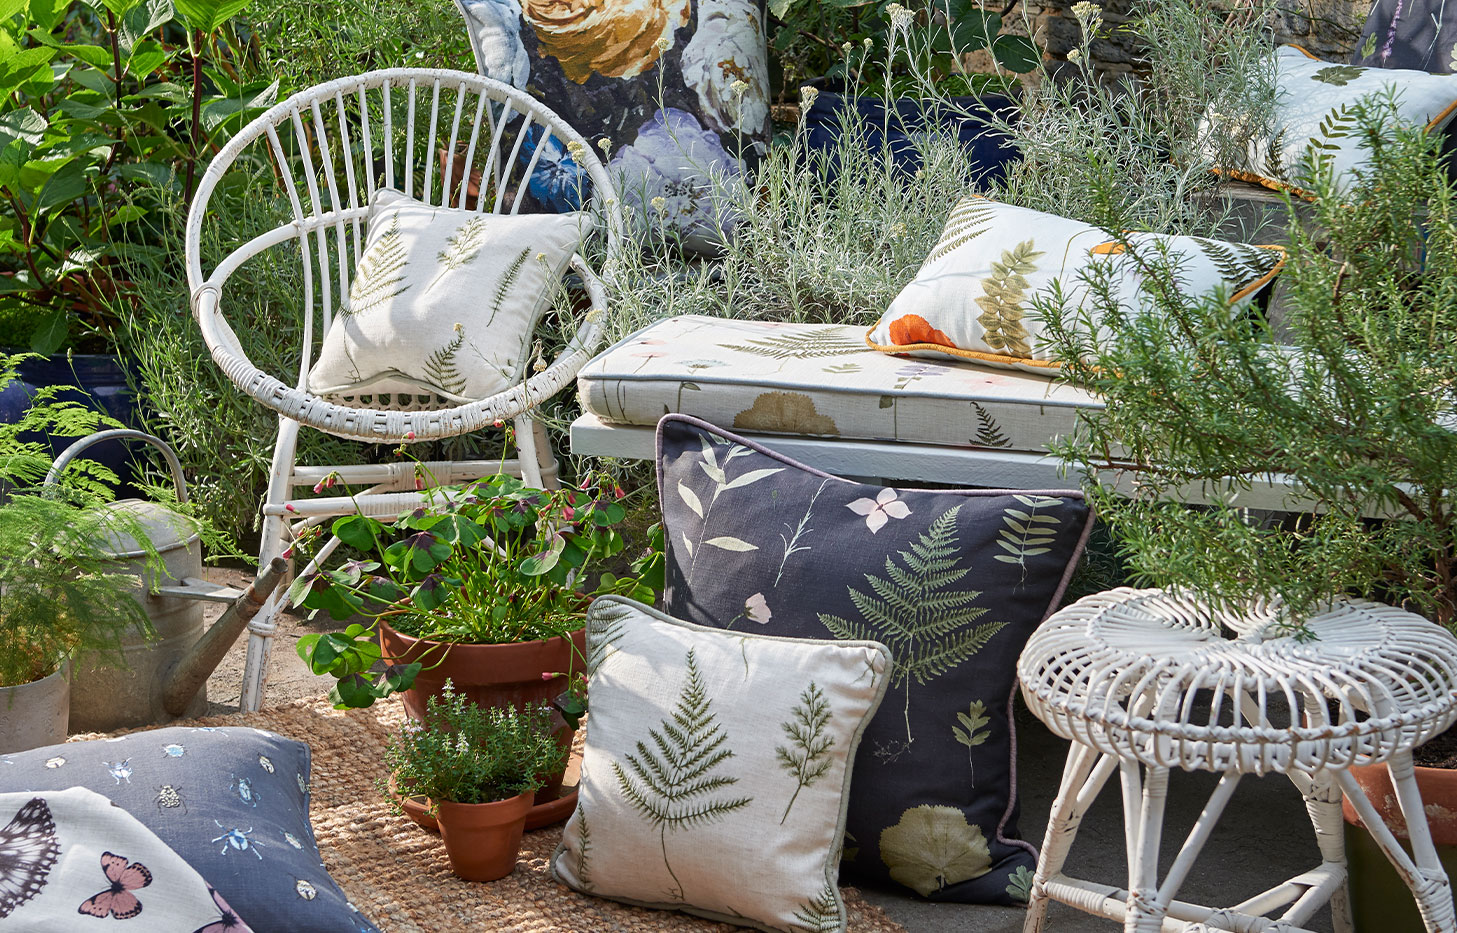 multiple cushions in garden setting made from botanica fabrics